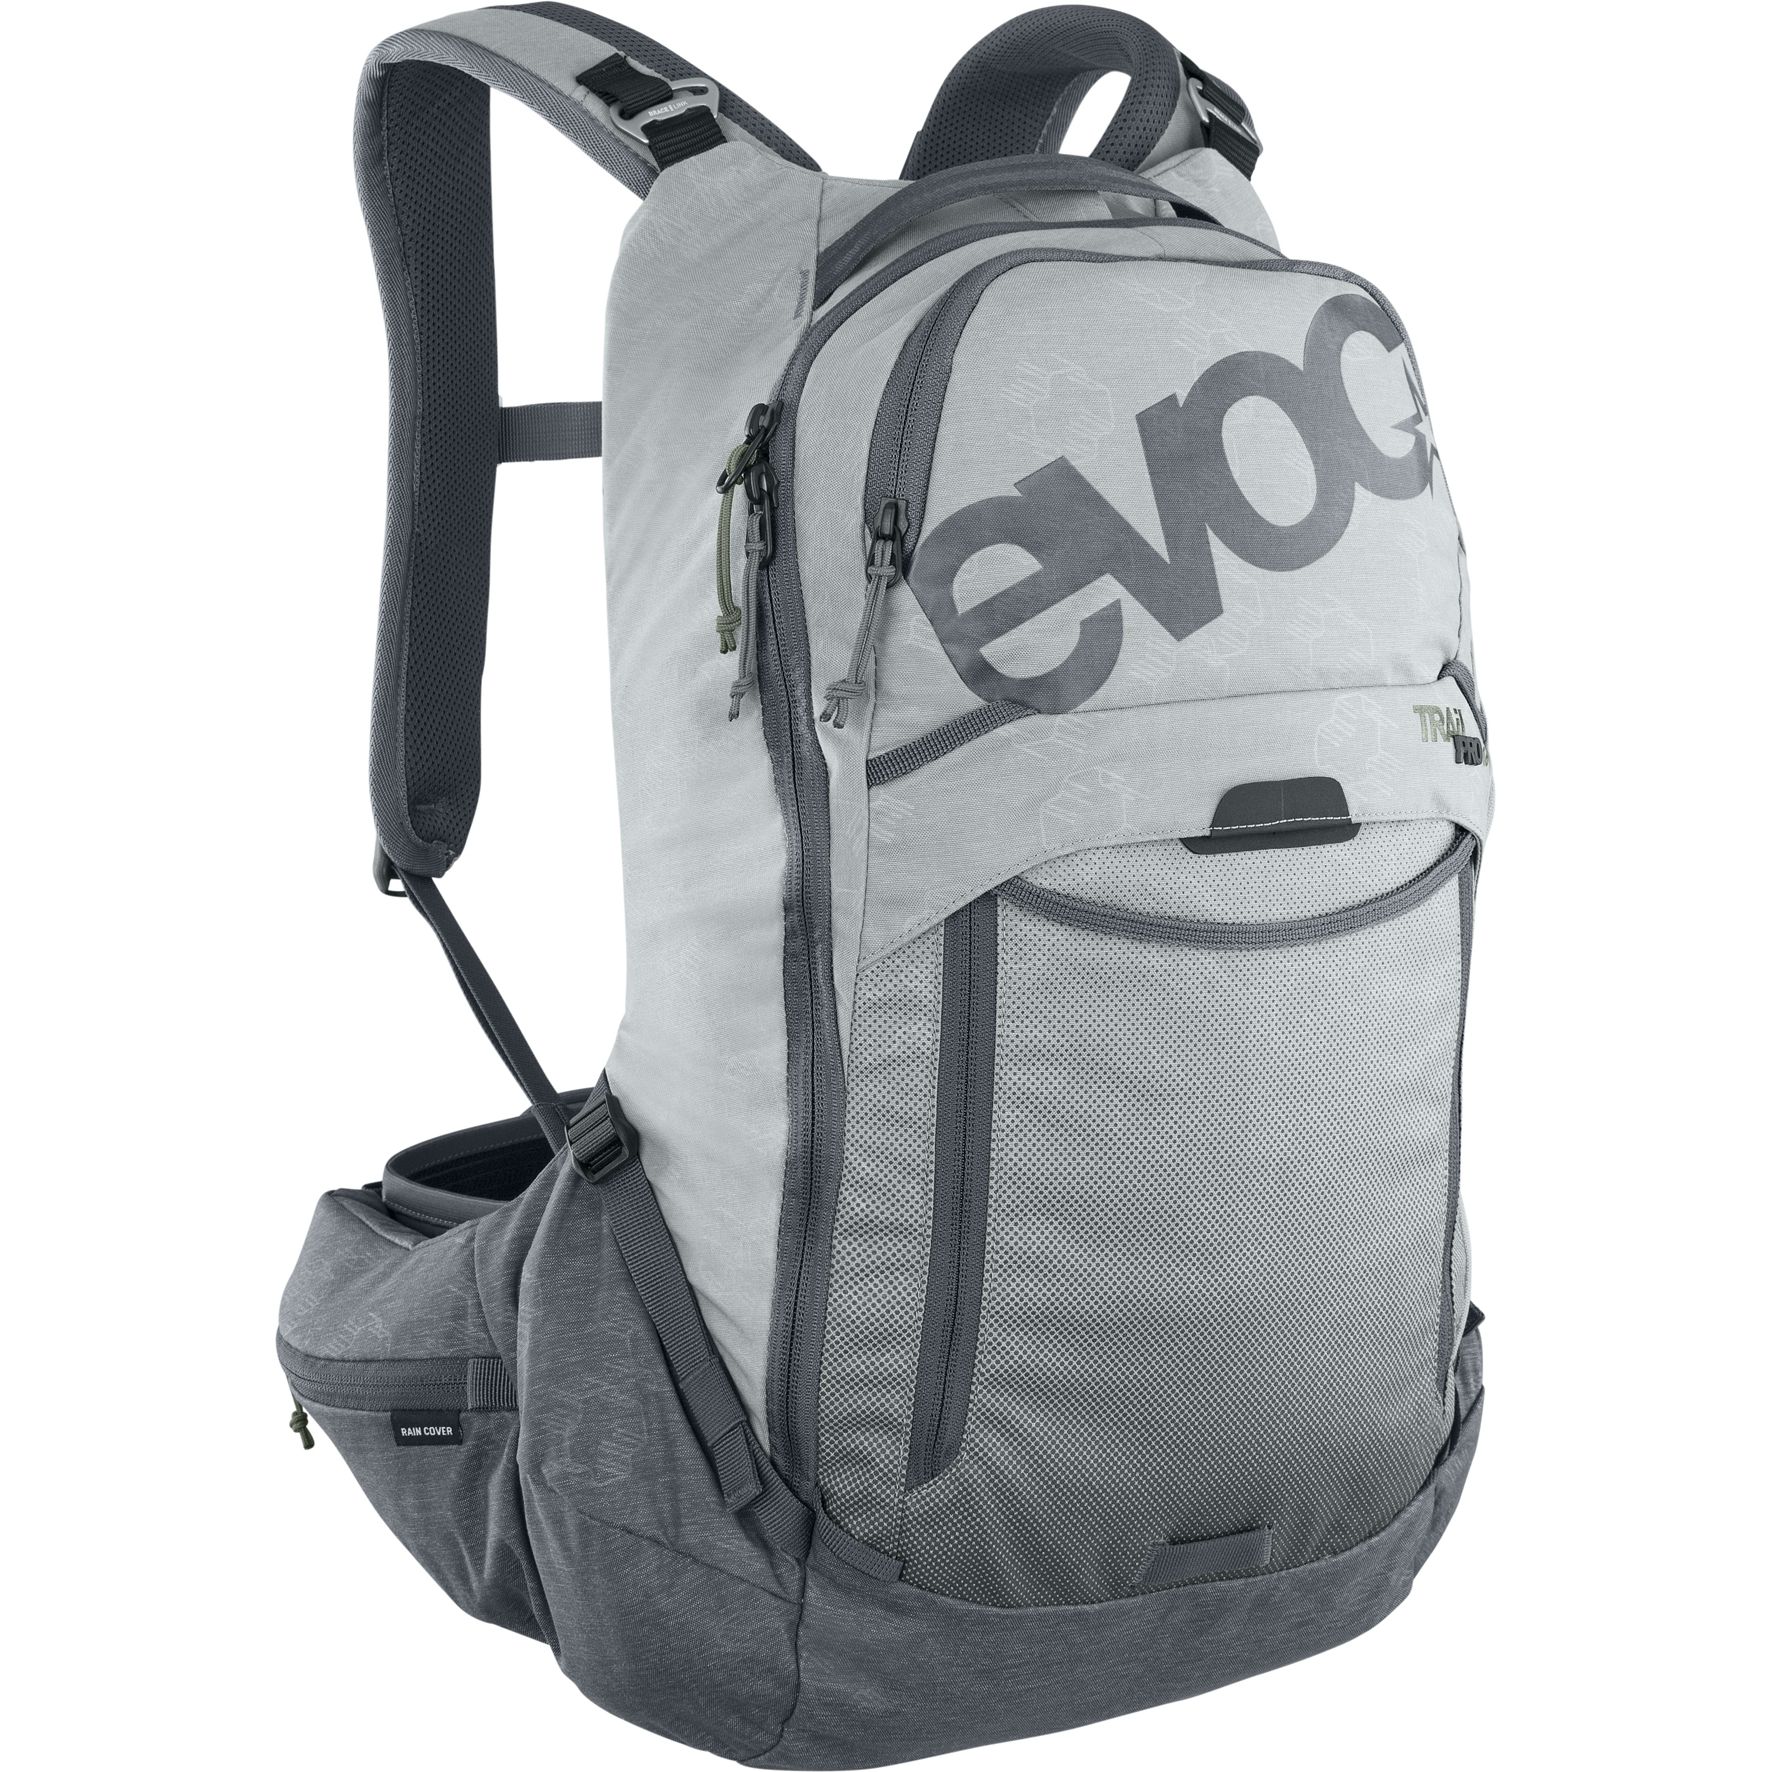 Picture of EVOC Trail Pro Protector Backpack - 16 L - Stone/Carbon Grey